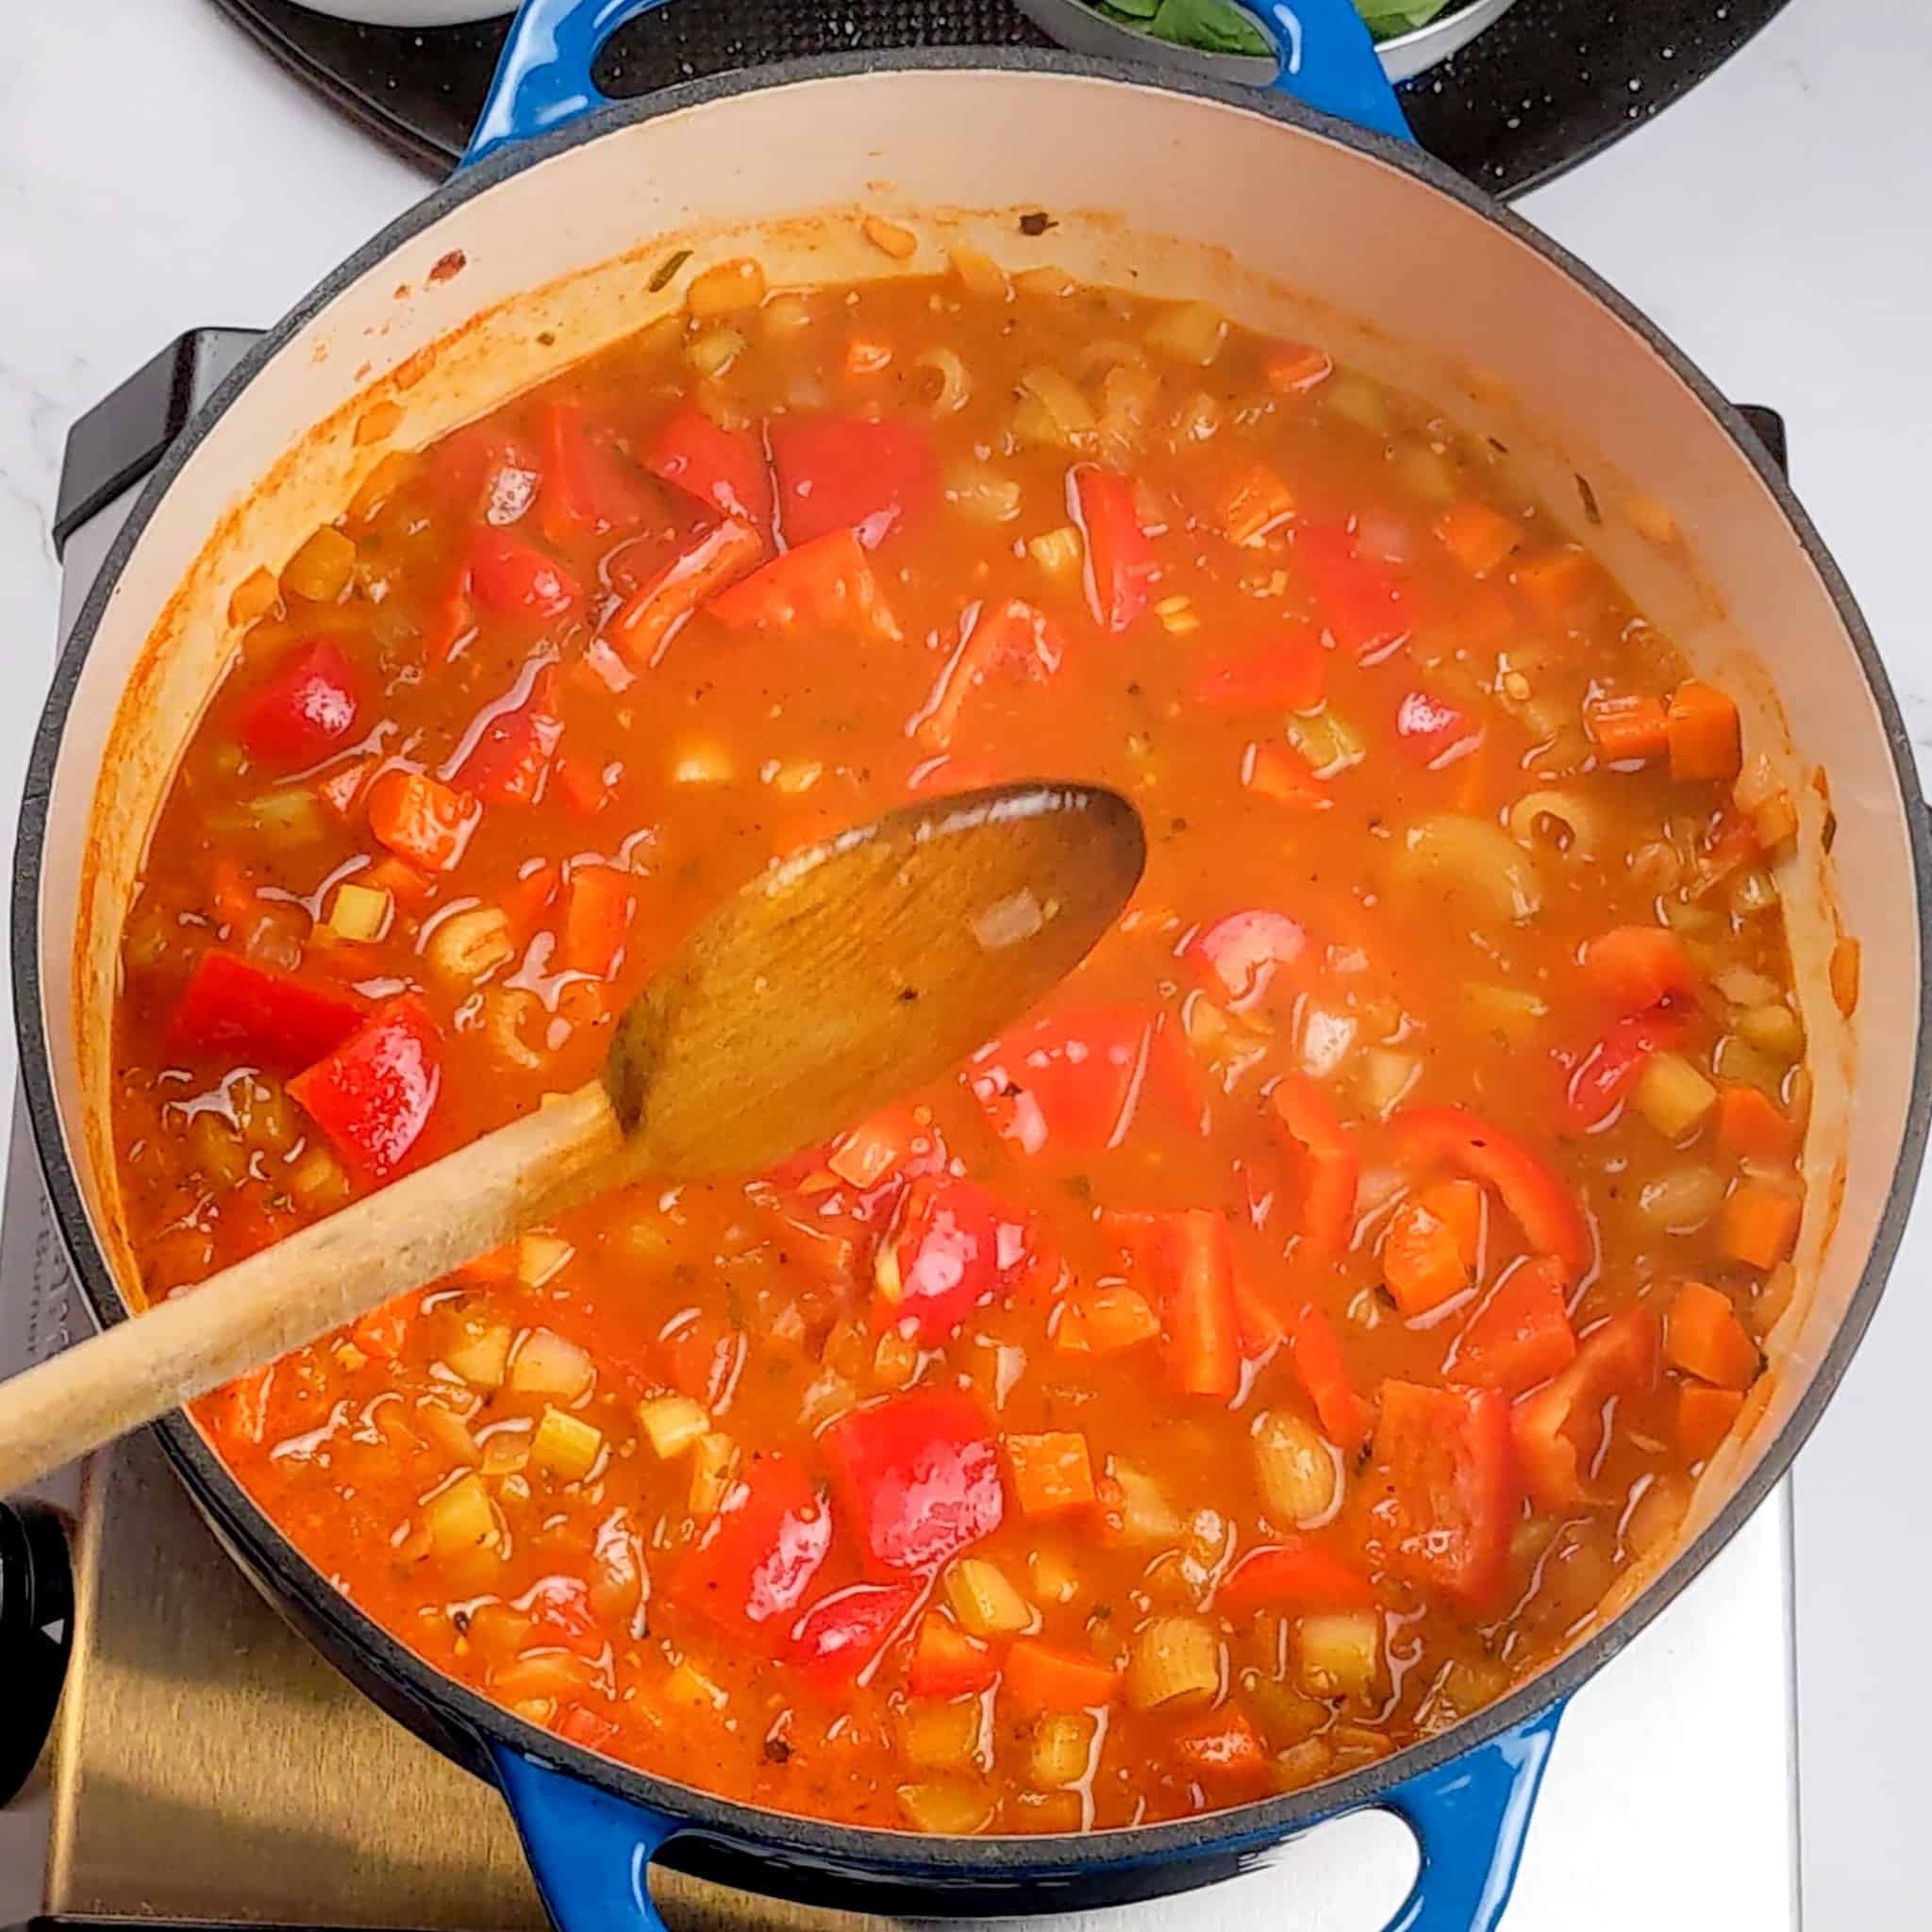 red bell pepper cooking and floating in a rich tomato broth with macaroni pasta for the macaroni cheese tomato stew recipe